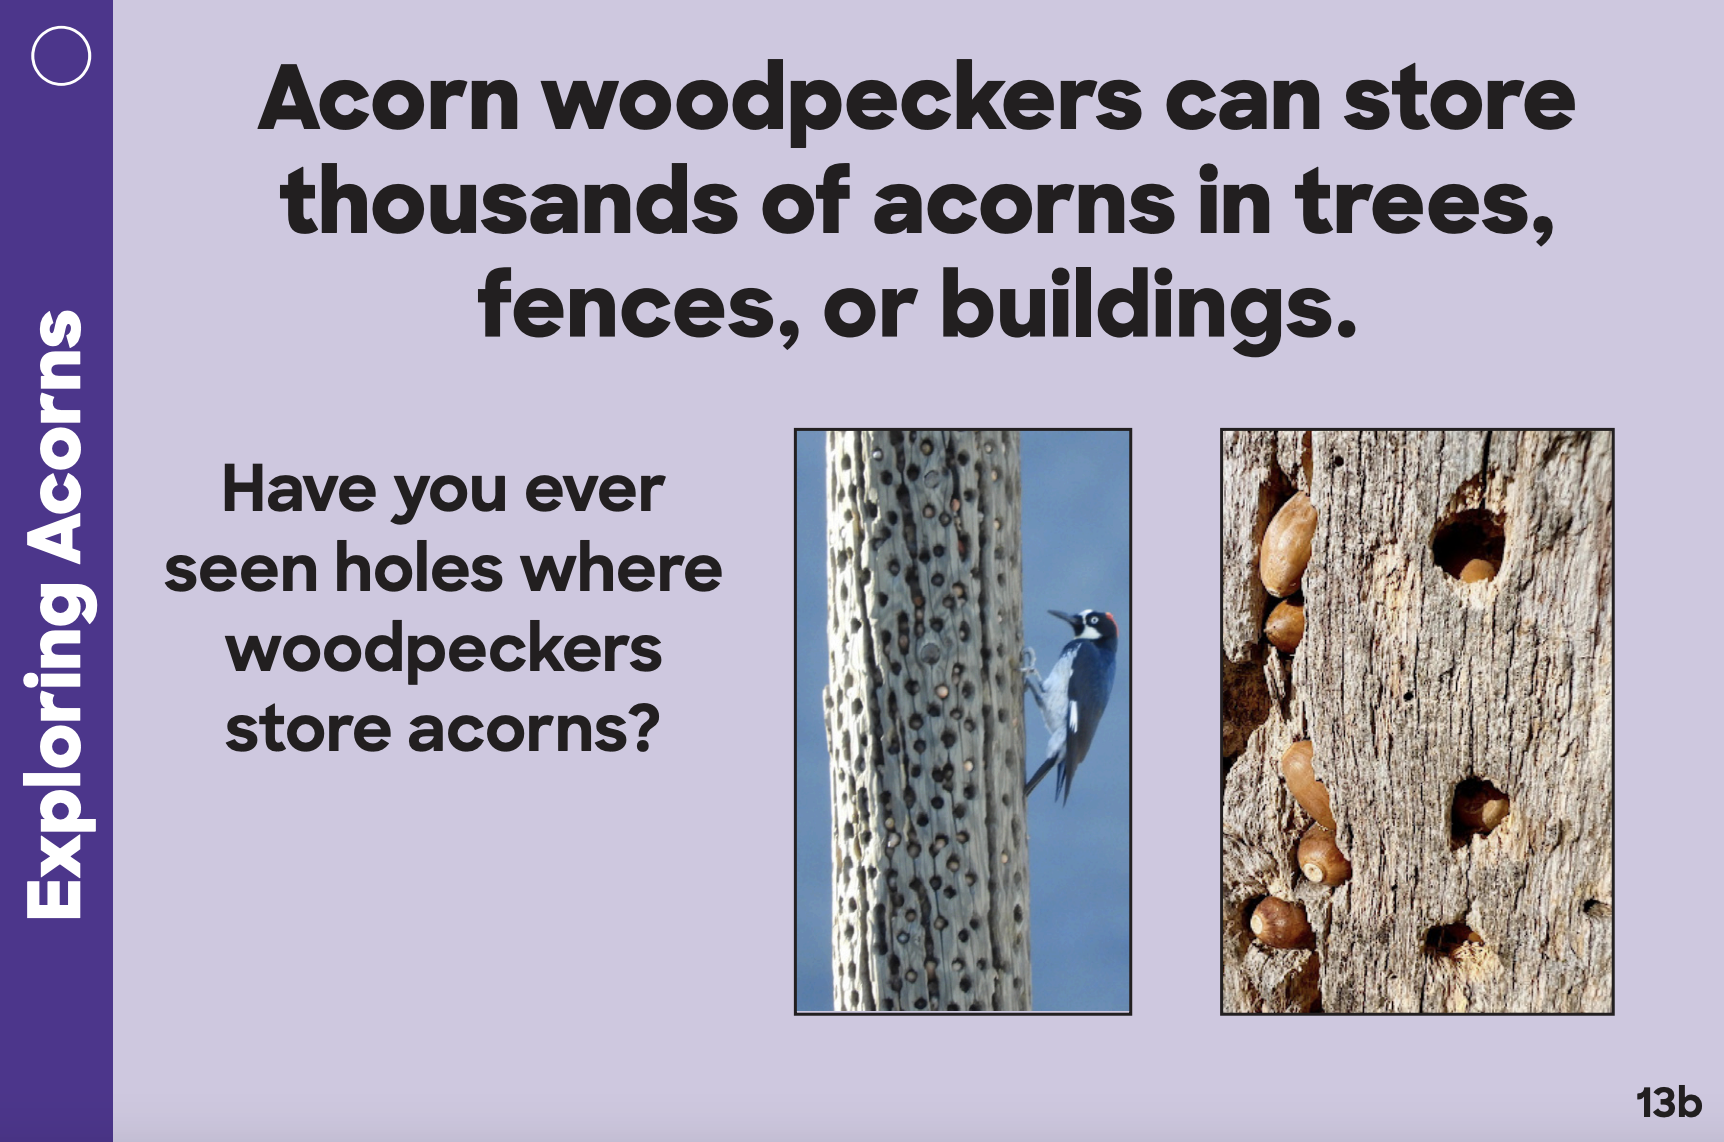 Exploring Acorns Card: Acorn woodpeckers can store thousands of acorns in trees, fences, or buildings. Have you ever seen holes where woodpeckers store acorns?